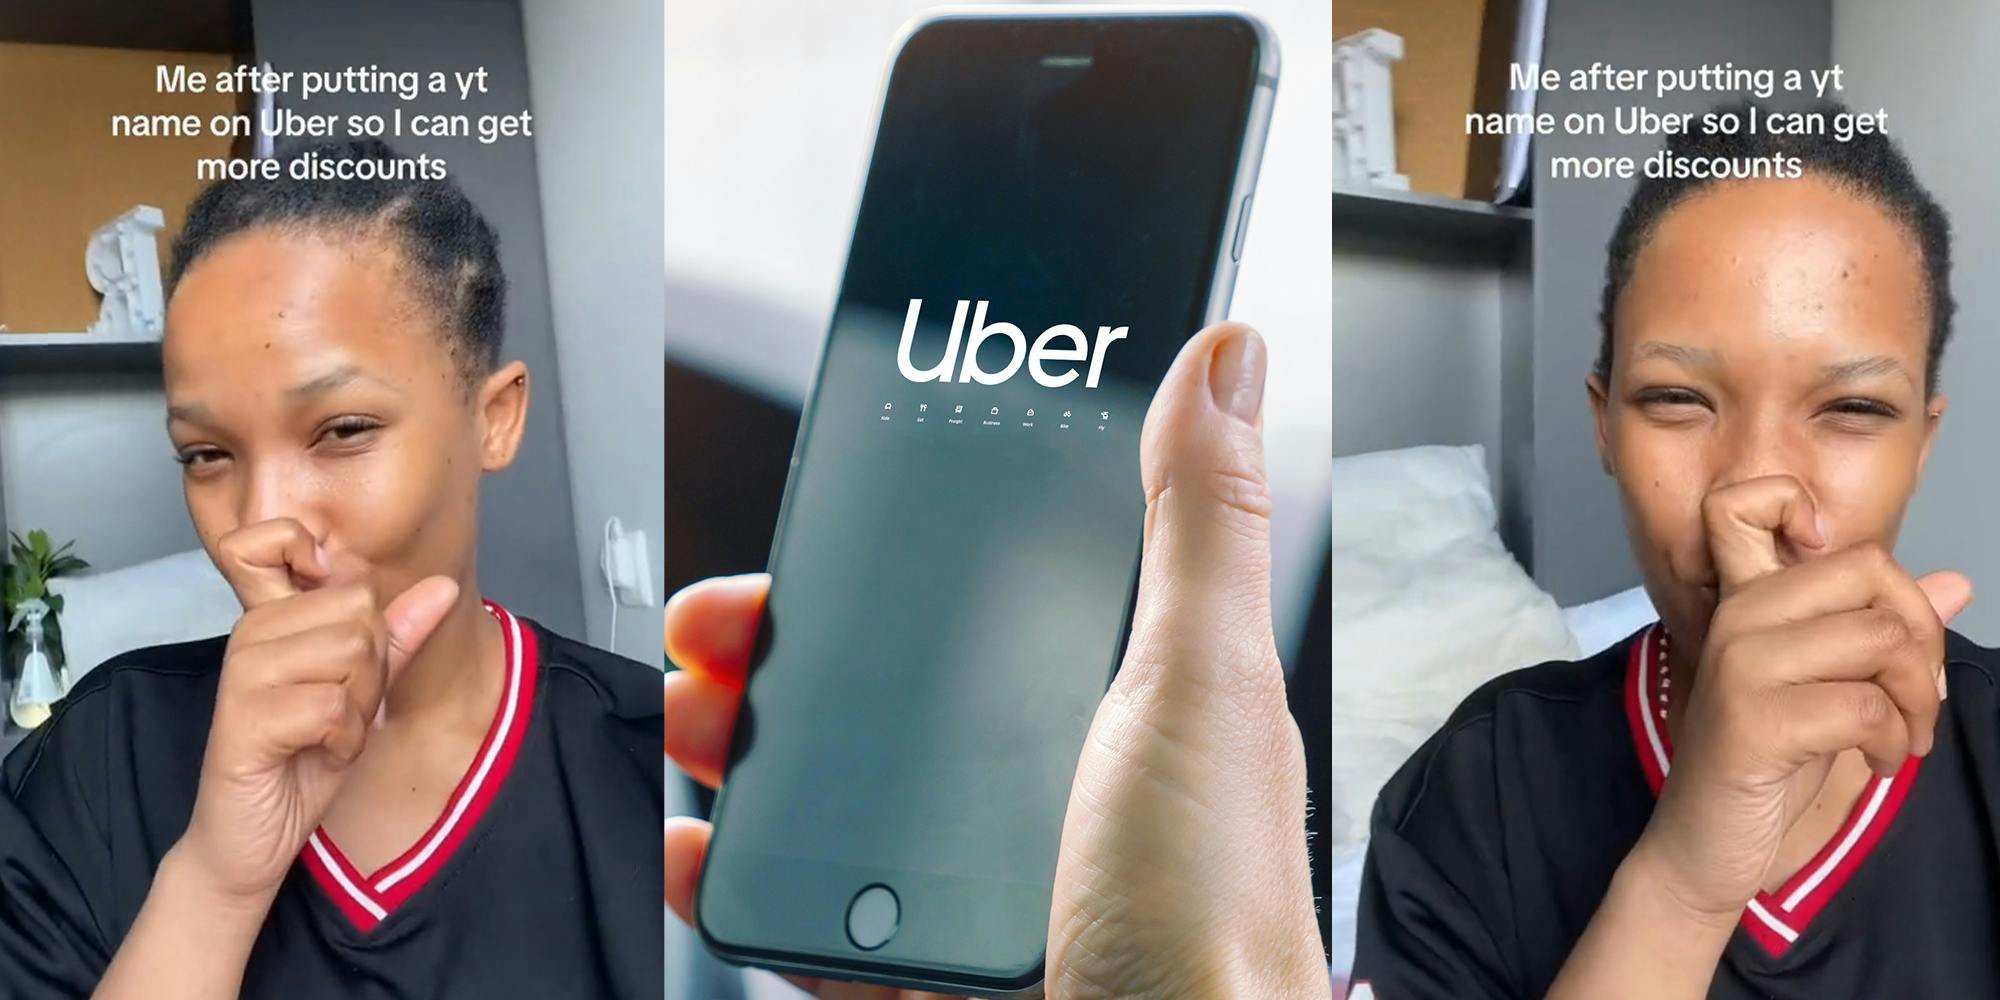 ‘Had a discount for THE PAST YEAR because of this’: Black Uber customer says she uses 'white' name to get more discounts